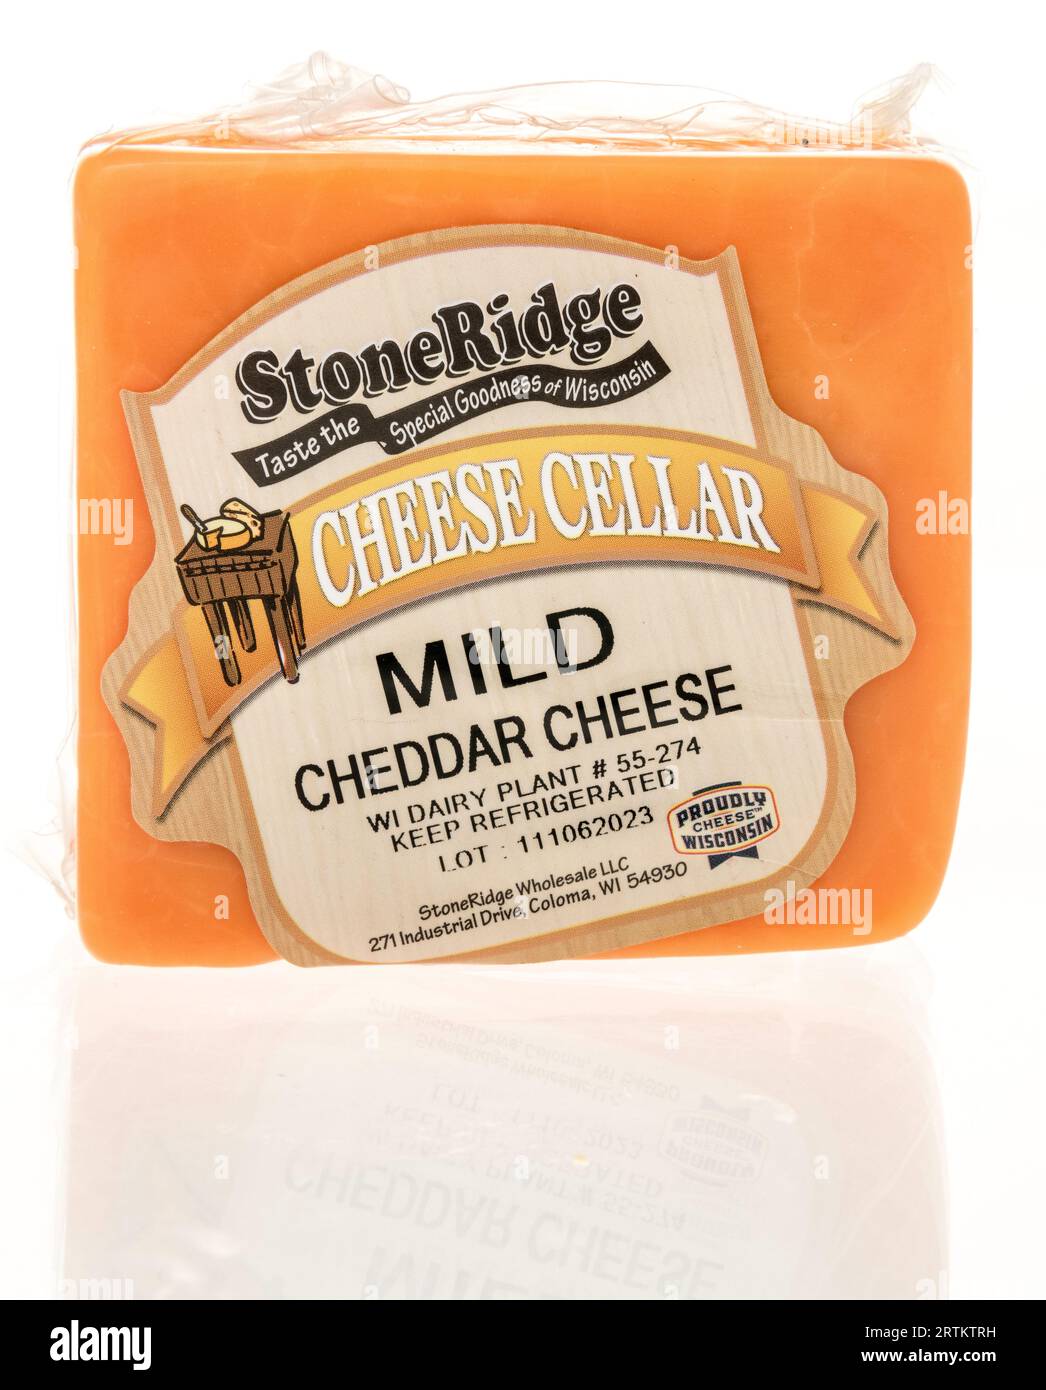 Winneconne, WI - 23 July 2023:  A package of Stone Ridge cheese cellar mild cheddar cheese on an isolated background Stock Photo